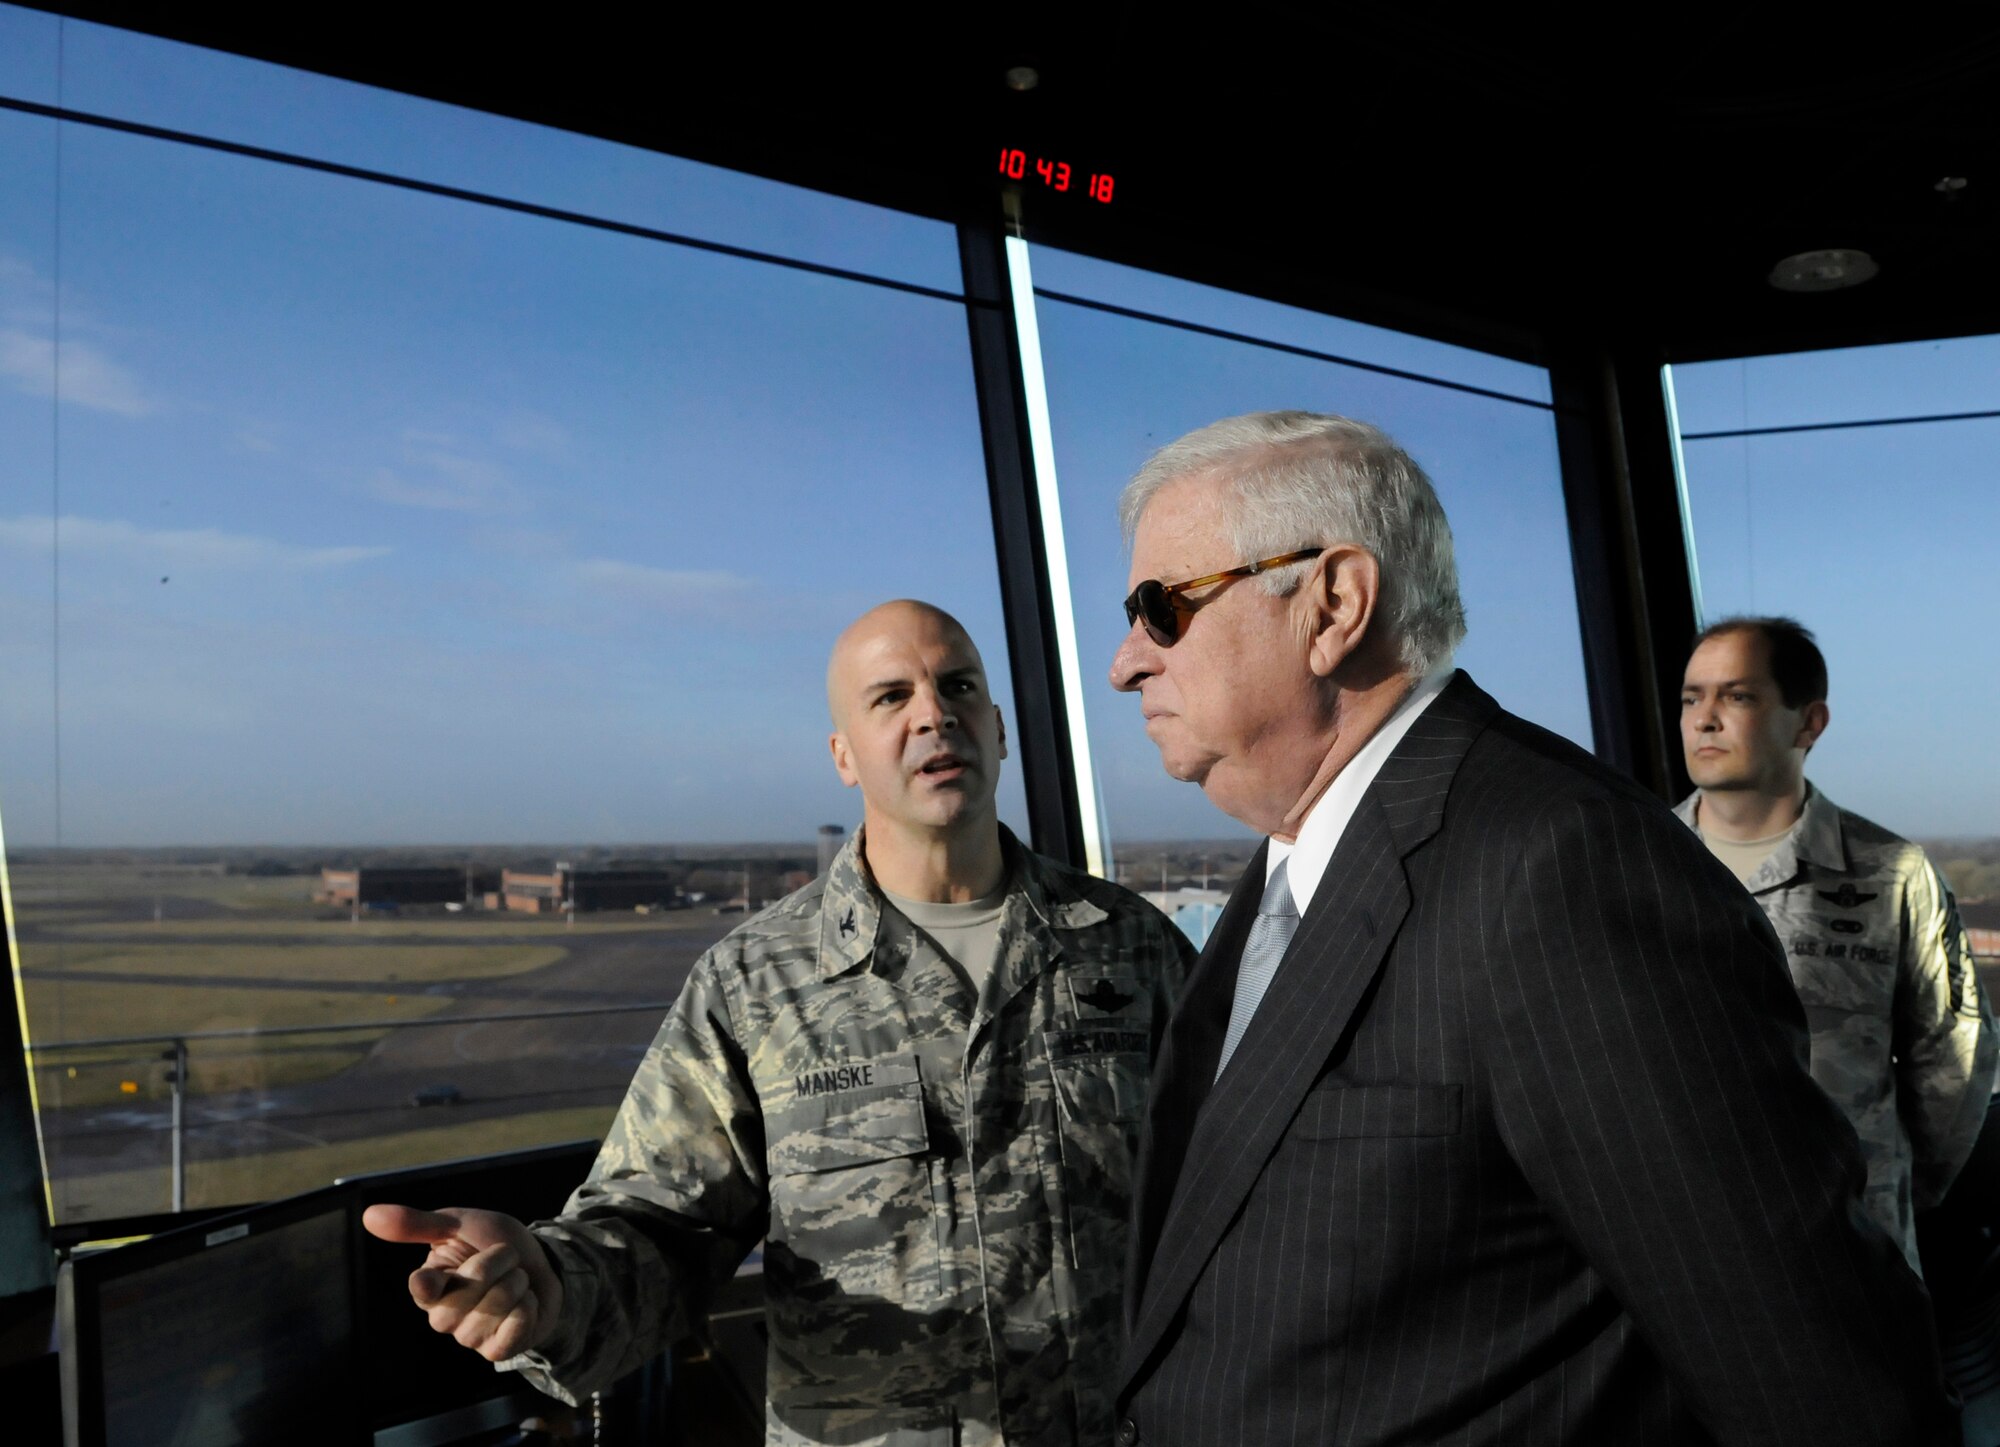 RAF MILDENHALL, England -- U.S. Ambassador to the U.K. Louis Susman gets a view of the base from the control tower Nov. 12 as Col. Chad Manske, 100th Air Refueling Wing commander, explains the mission at RAF Mildenhall.  While at the tower Ambassador Susman was shown some of the challenges and future plans for the base.  (U.S. Air Force photo/Staff Sgt. Christopher L. Ingersoll)